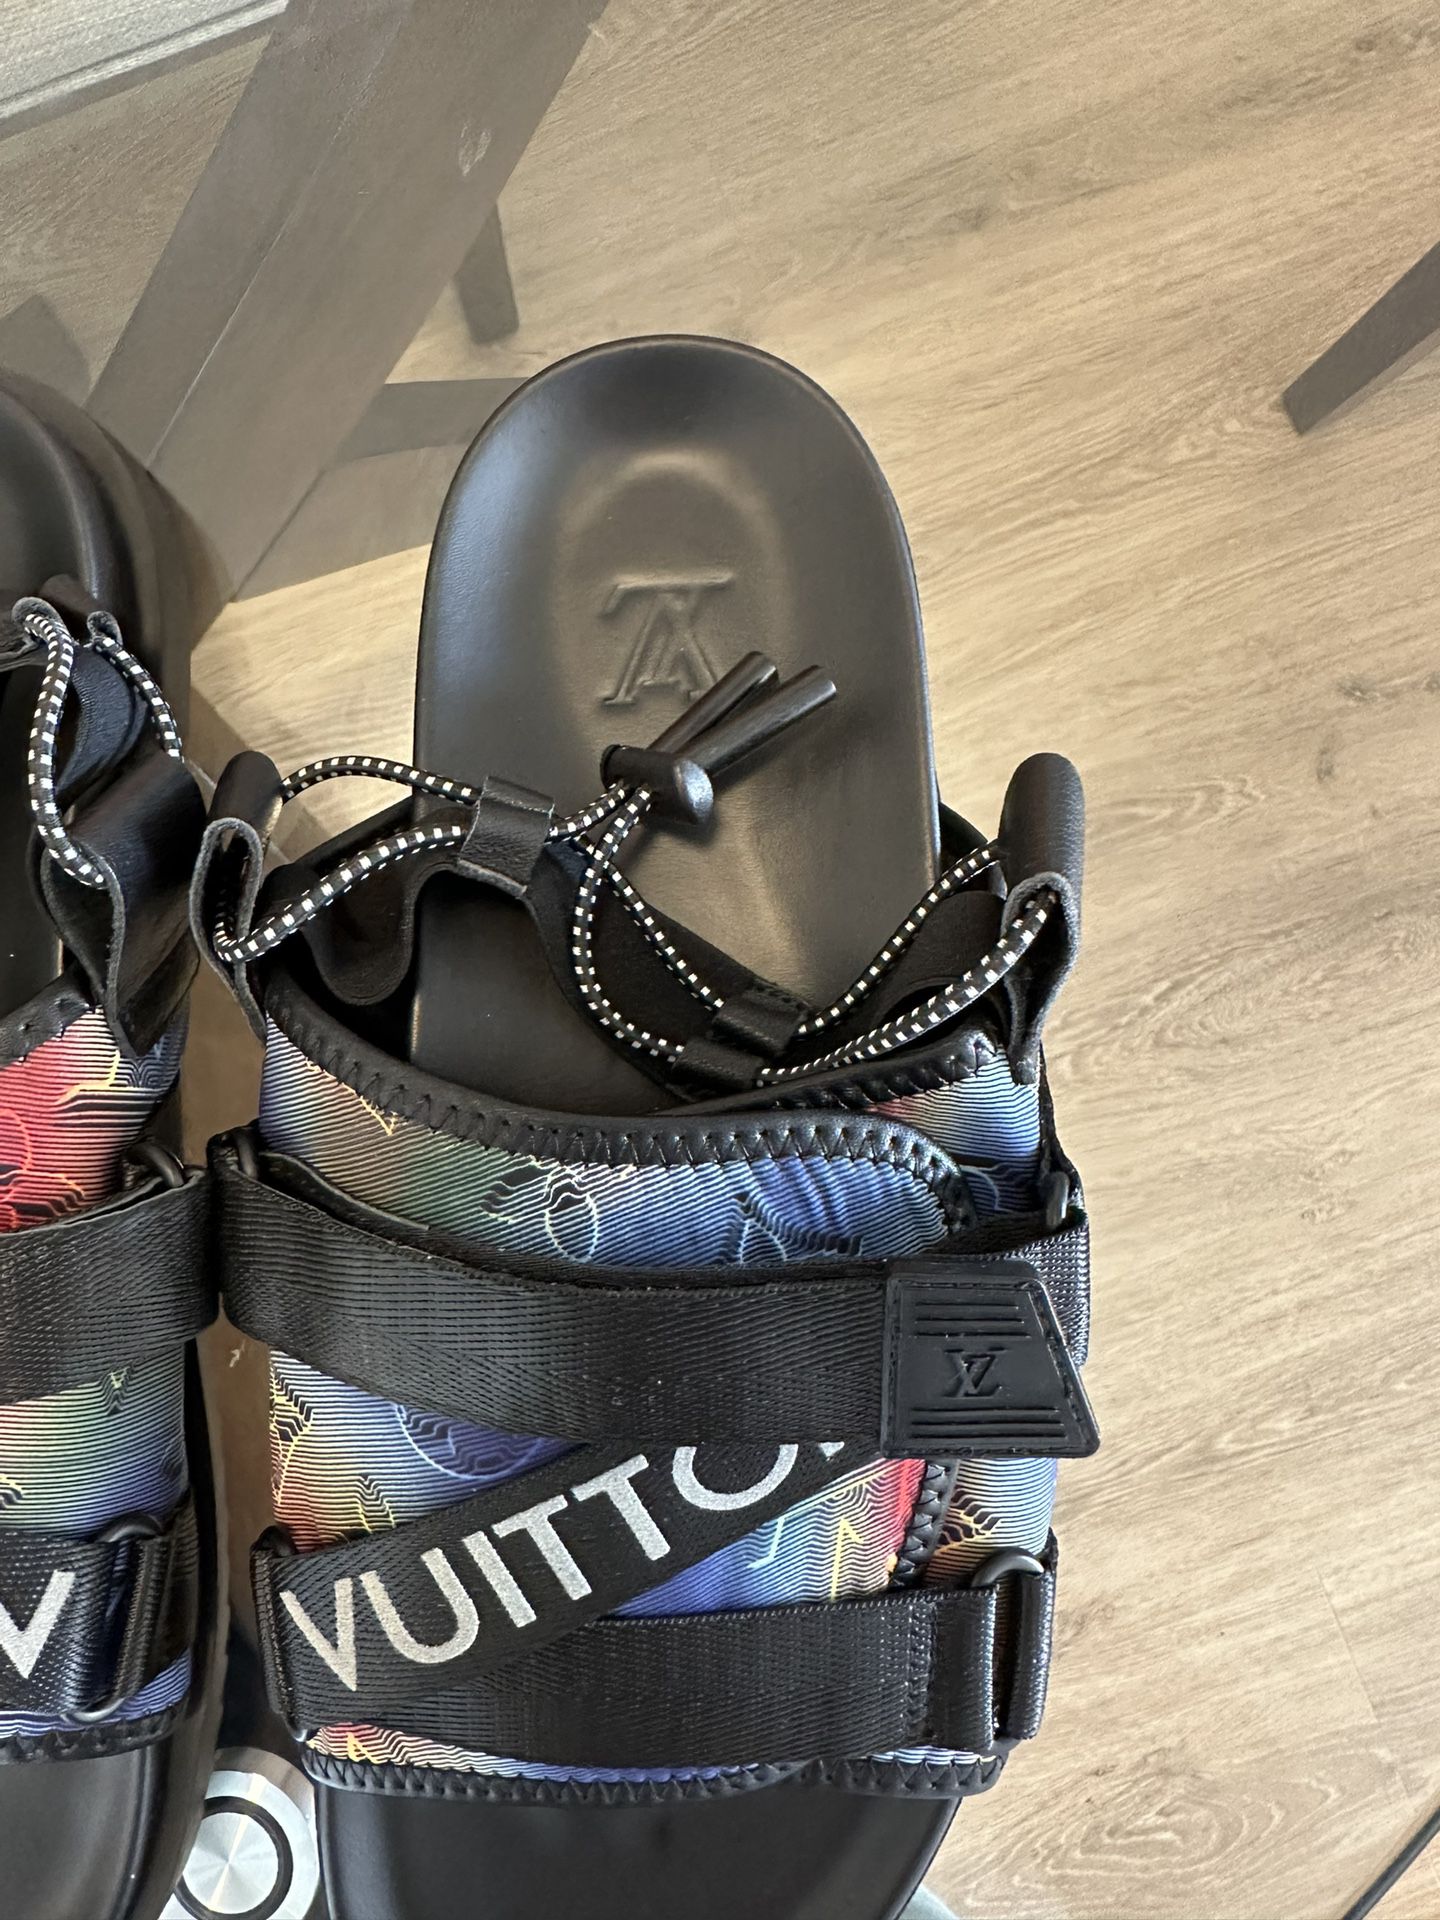 Luxe Slippers LV Sherpa Slides for Sale in Corona, CA - OfferUp